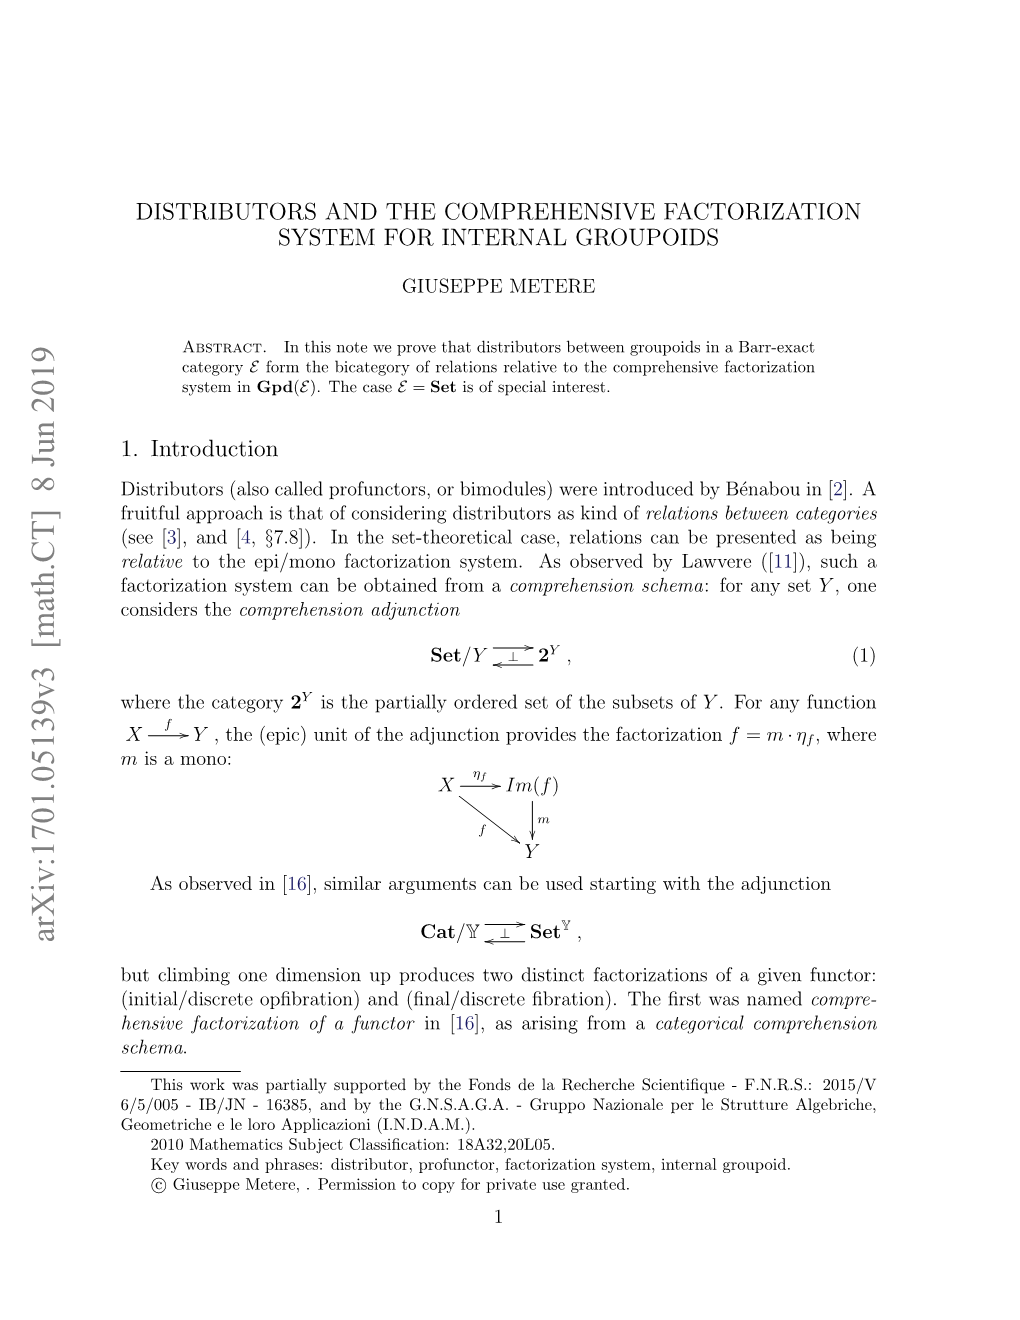 Distributors and the Comprehensive Factorization System for Internal Groupoids